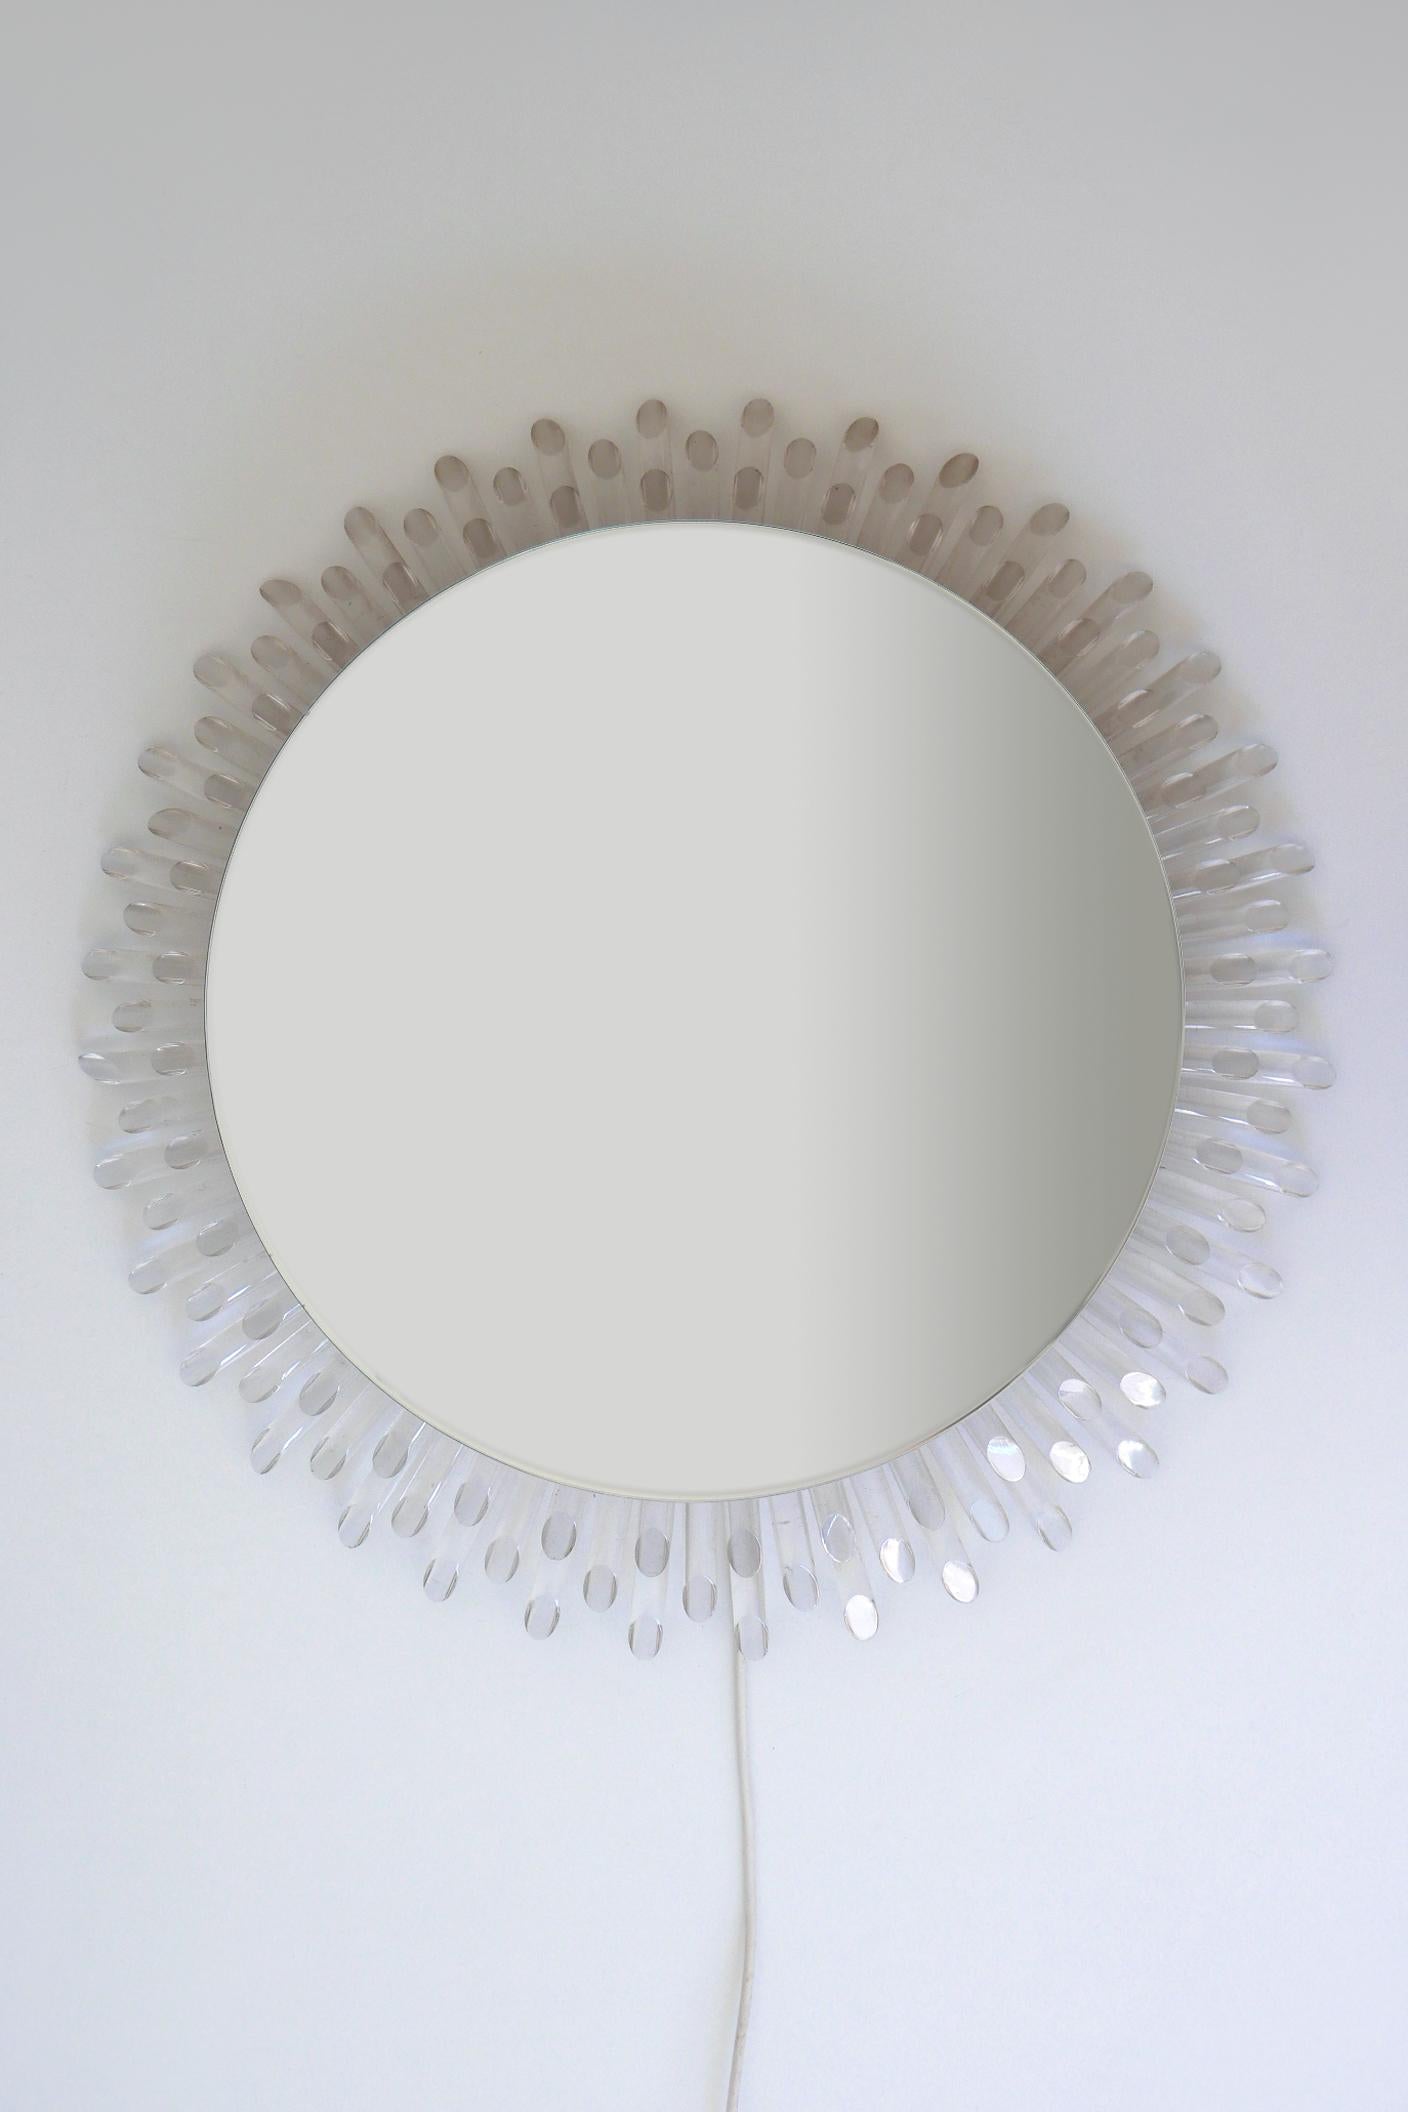 Spectacular Large Mid-Century Modern Backlit Sunburst Wall Mirror Germany 1970s For Sale 6